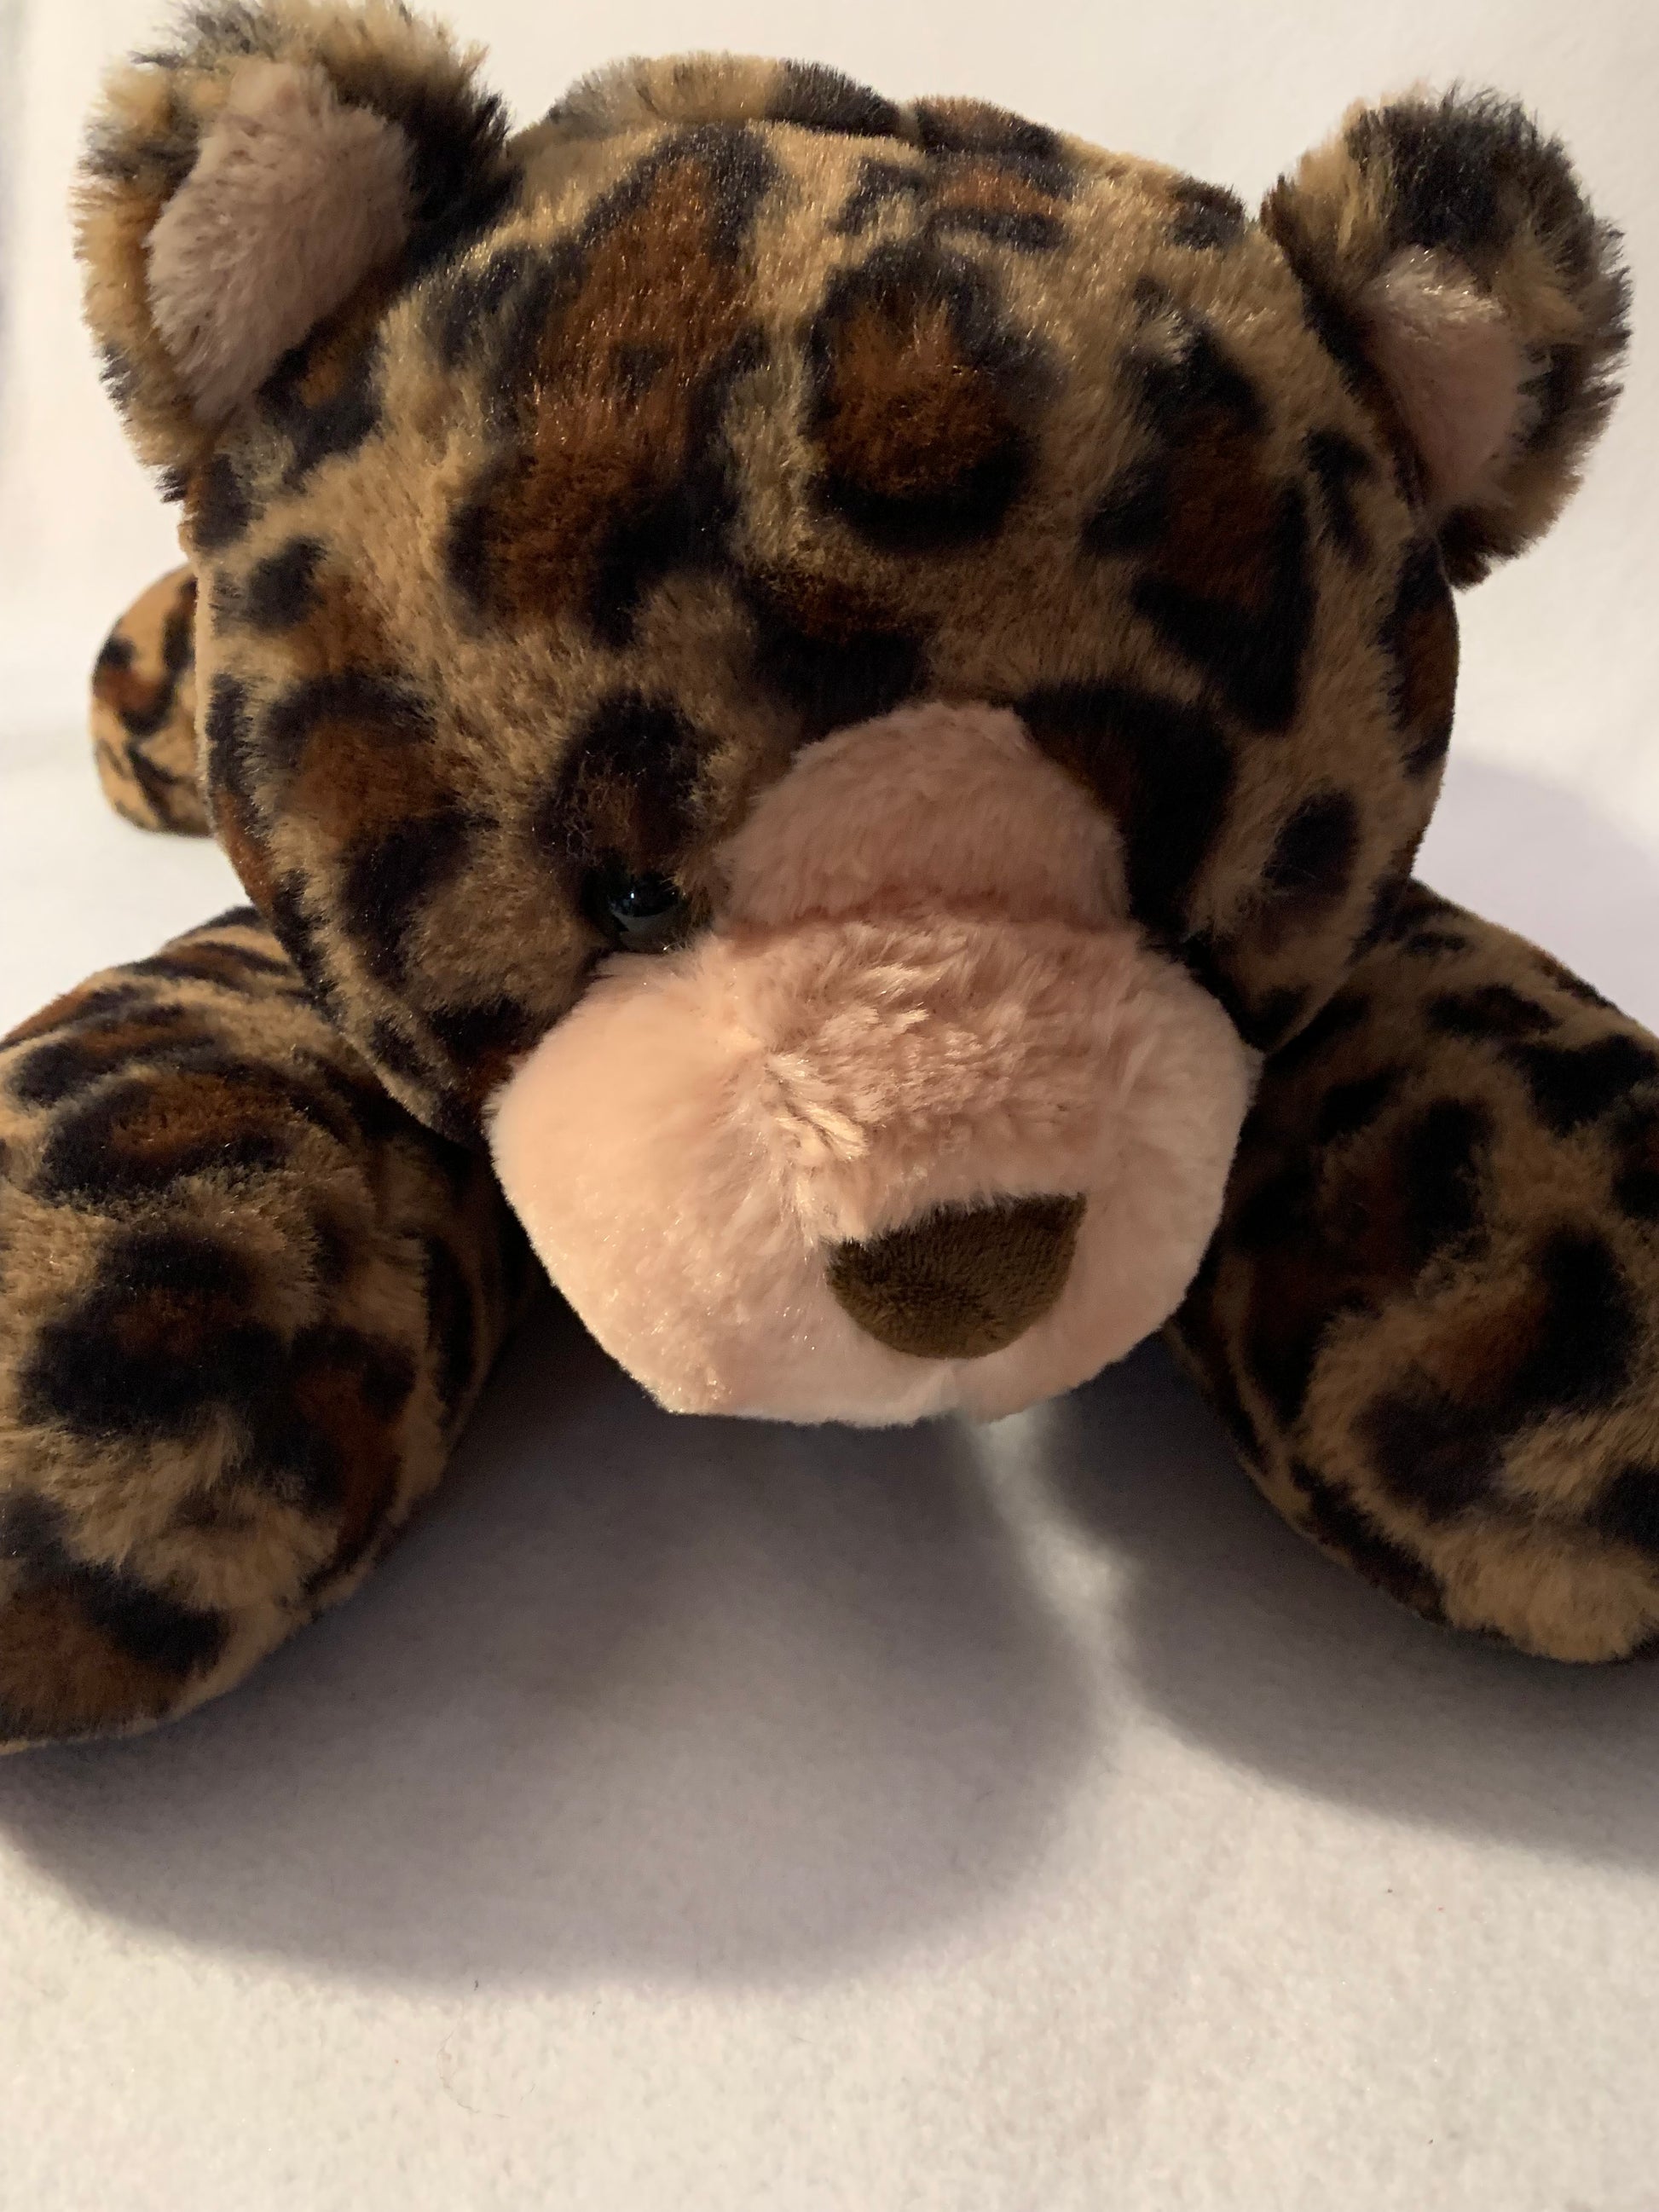 Weighted stuffed animal - tiger sensory toy with 2 1/2-3 lbs, autism s –  auntsandyssewing